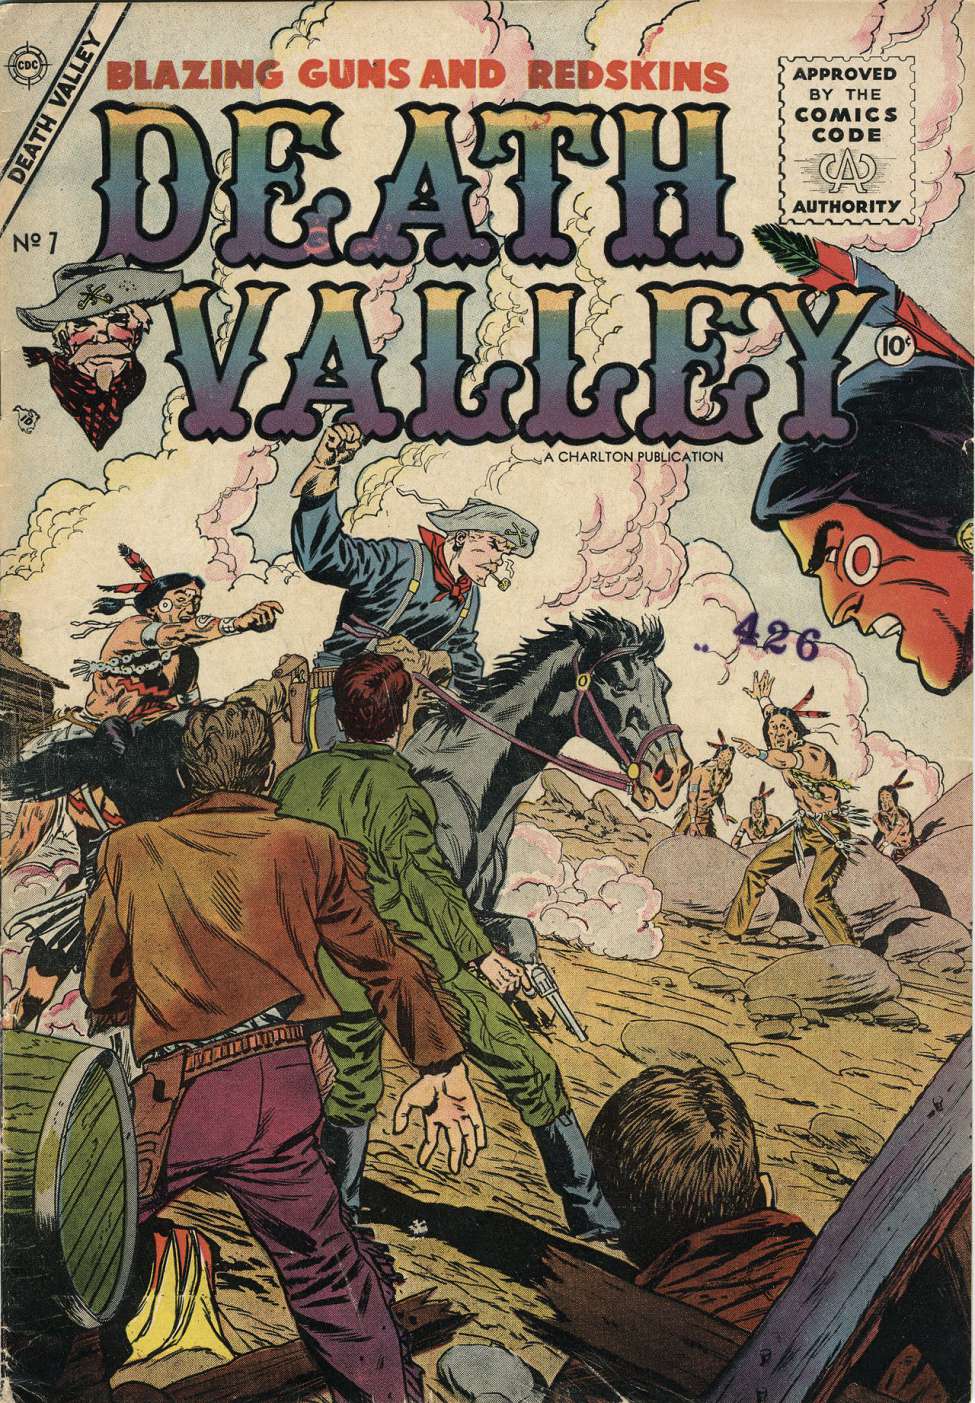 Comic Book Cover For Death Valley 7 - Version 2